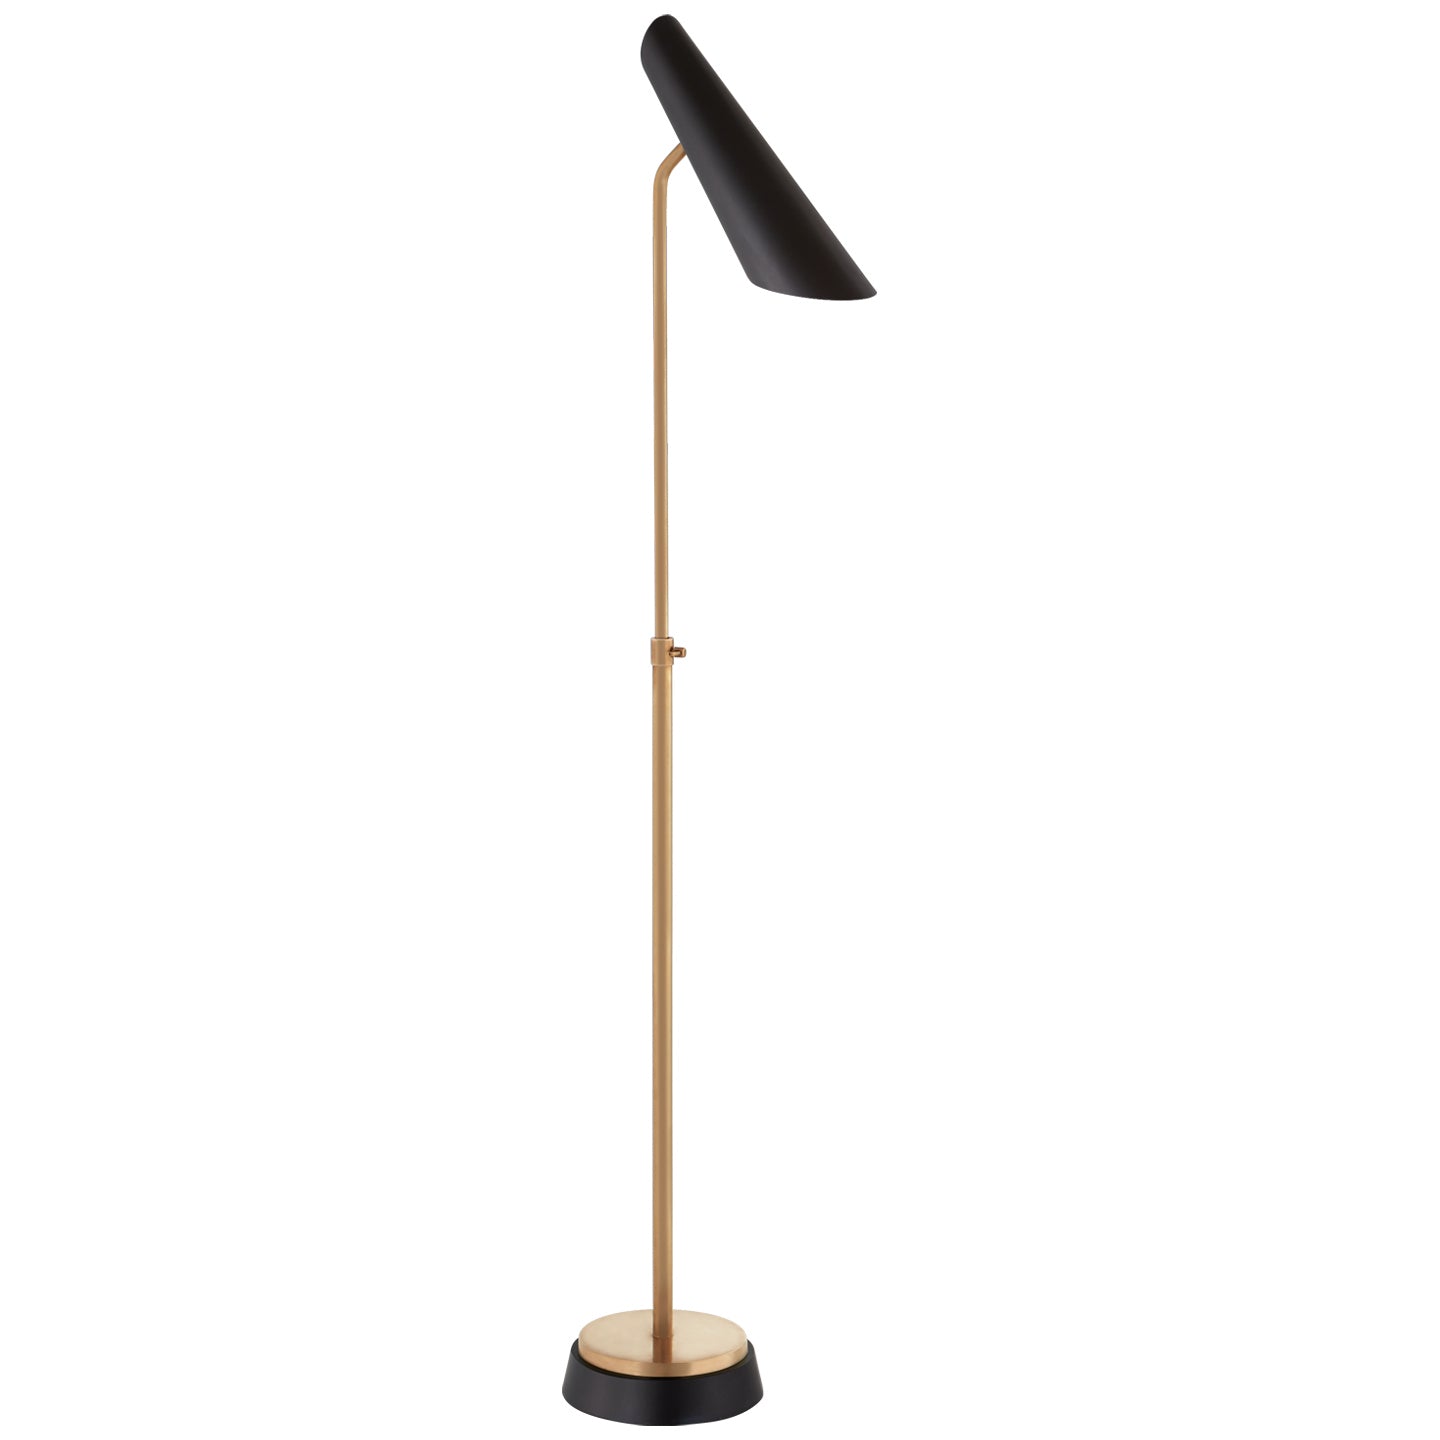 LED Floor Lamp from the Franca collection in Hand-Rubbed Antique Brass With Black Shade finish